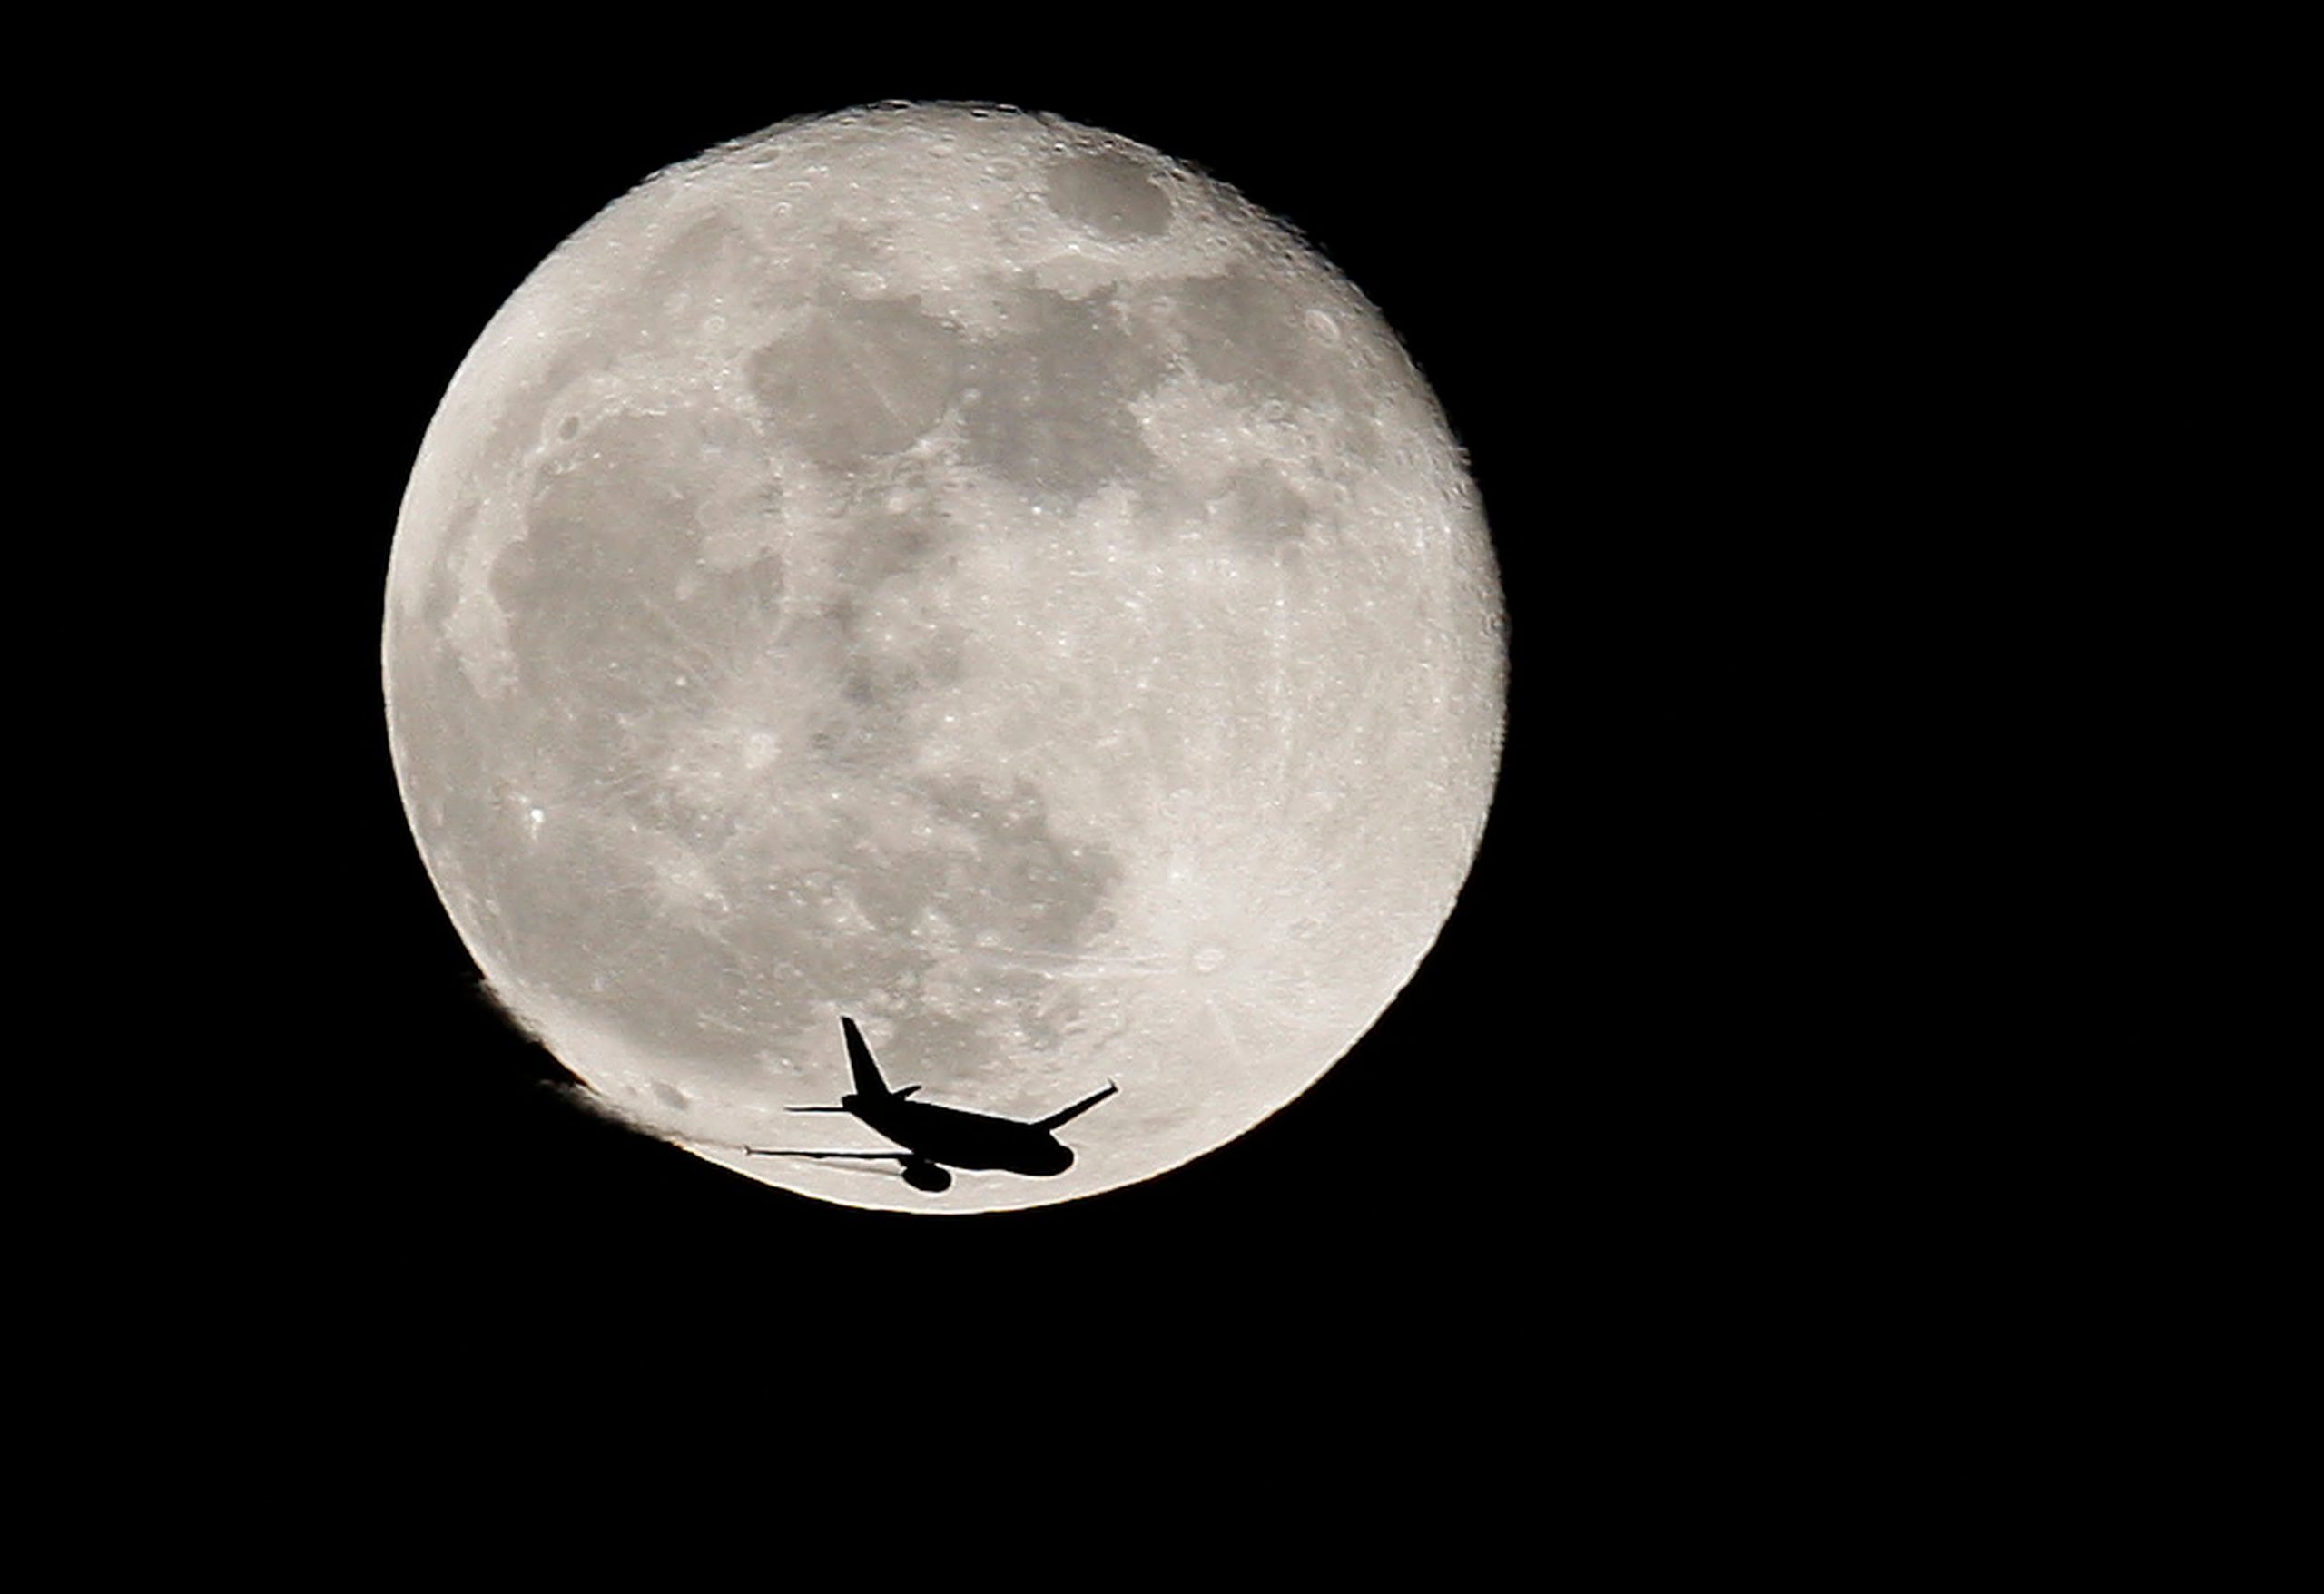 FILE PHOTO: An airplane is silhouetted against a full moon in the sky over London January 1, 2010. REUTERS/Suzanne Plunkett/File Photo